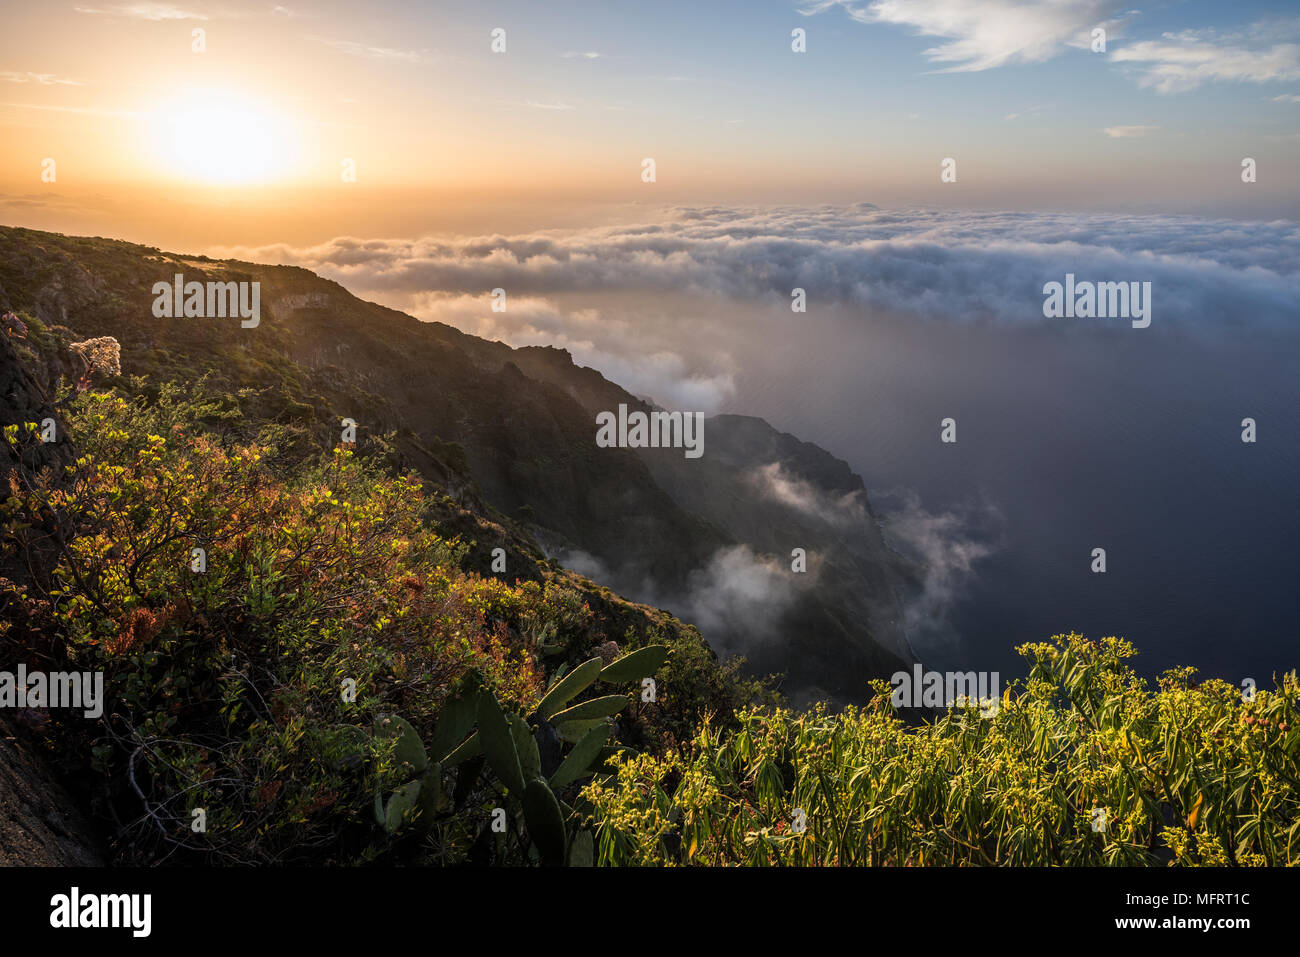 View from the viewpoint Mirador, sunrise with cloud cover, El Hierro, Canary Islands, Spain Stock Photo